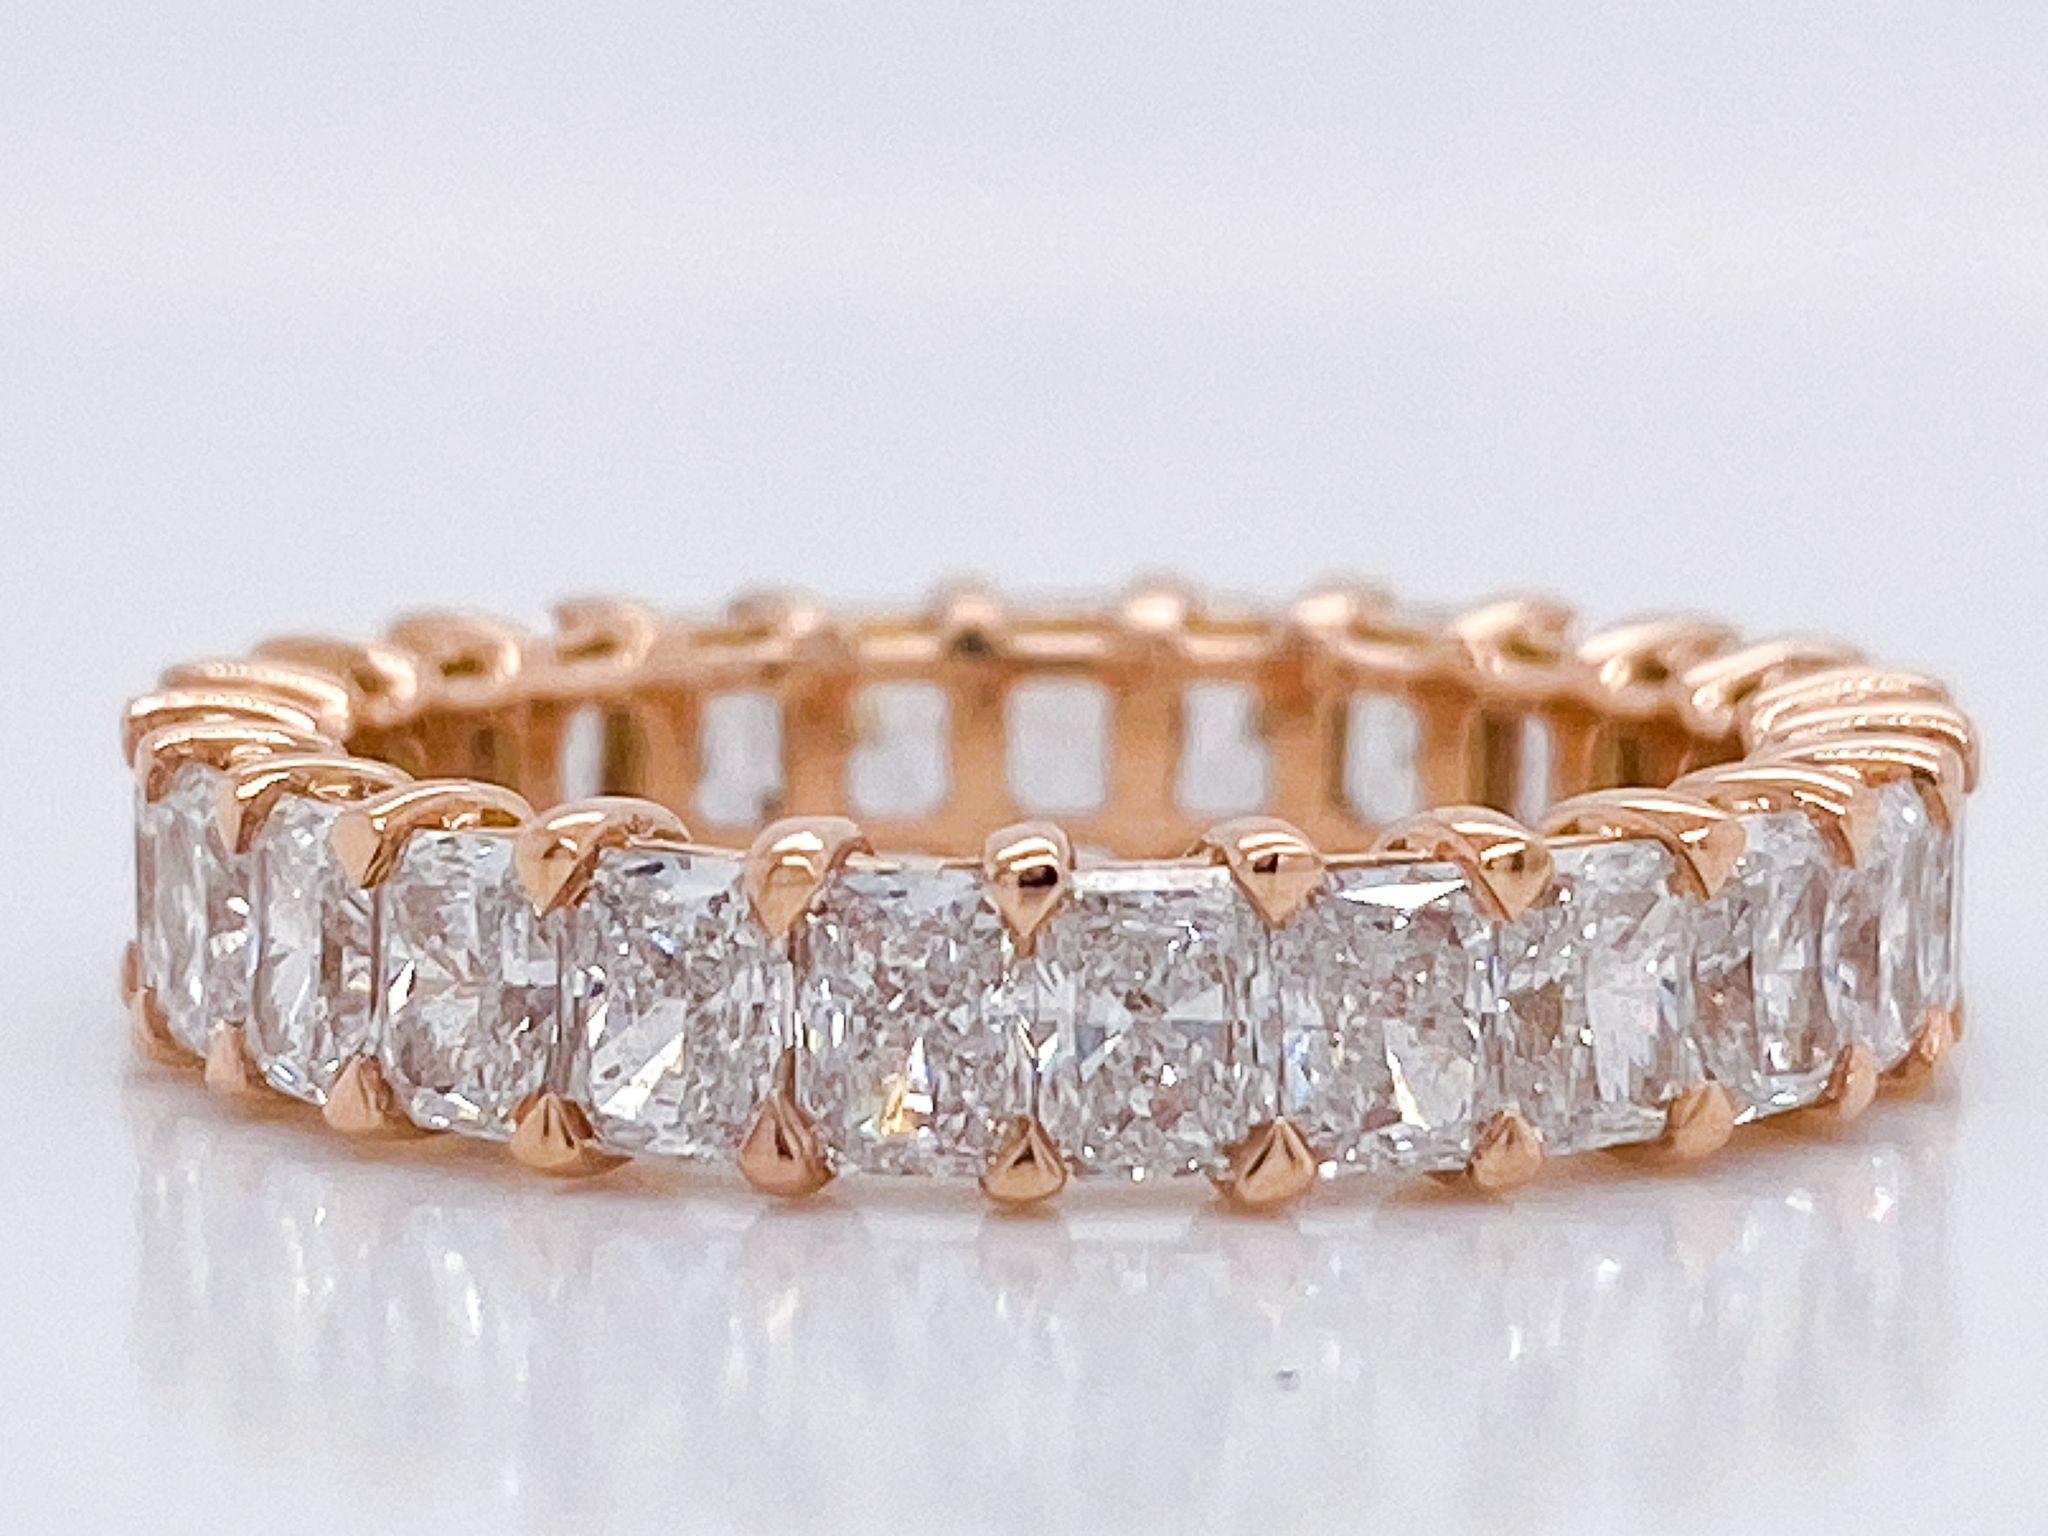 Imagine the look on her face when she sees this Radiant Diamond Eternity Band; featuring 25 Radiant Diamonds, nd weighing 3.58 Total Carat Weight. These diamonds are F Color, VS Clarity, and are set in a 18K Rose Gold setting in a finger size 6.25.